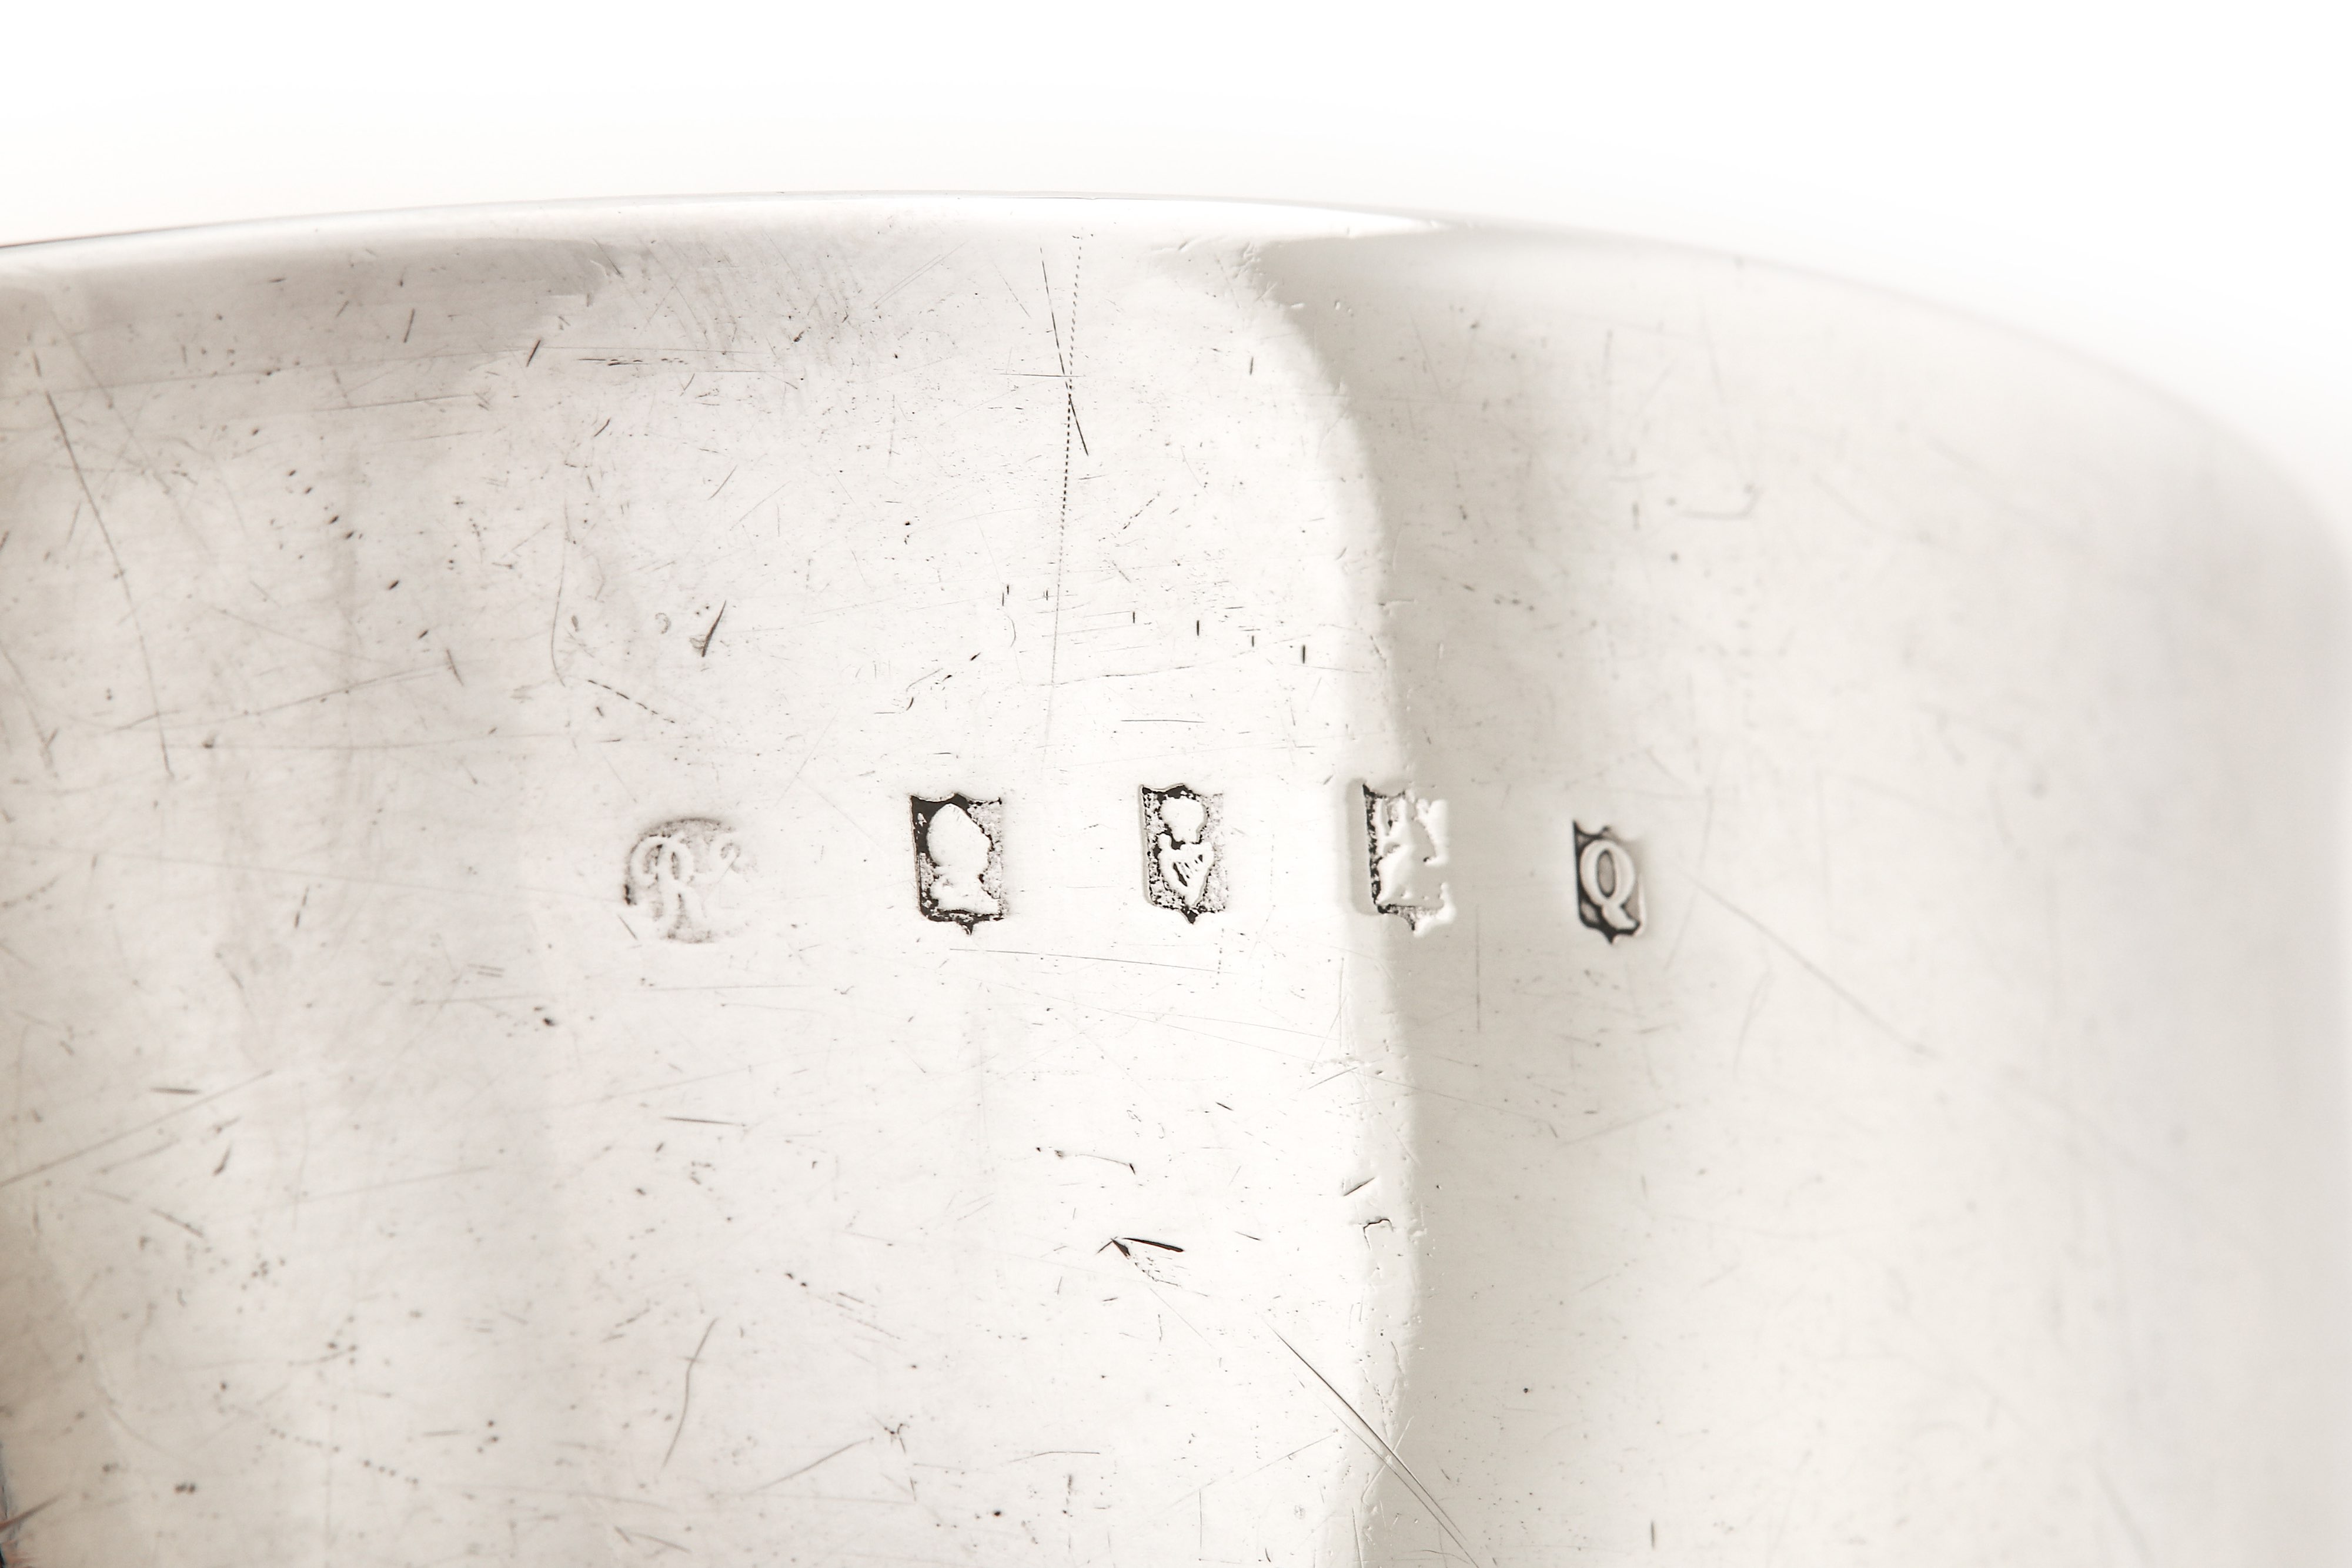 A George III Irish sterling silver footed bowl, Dublin 1812 by Richard Sawyer - Image 3 of 3